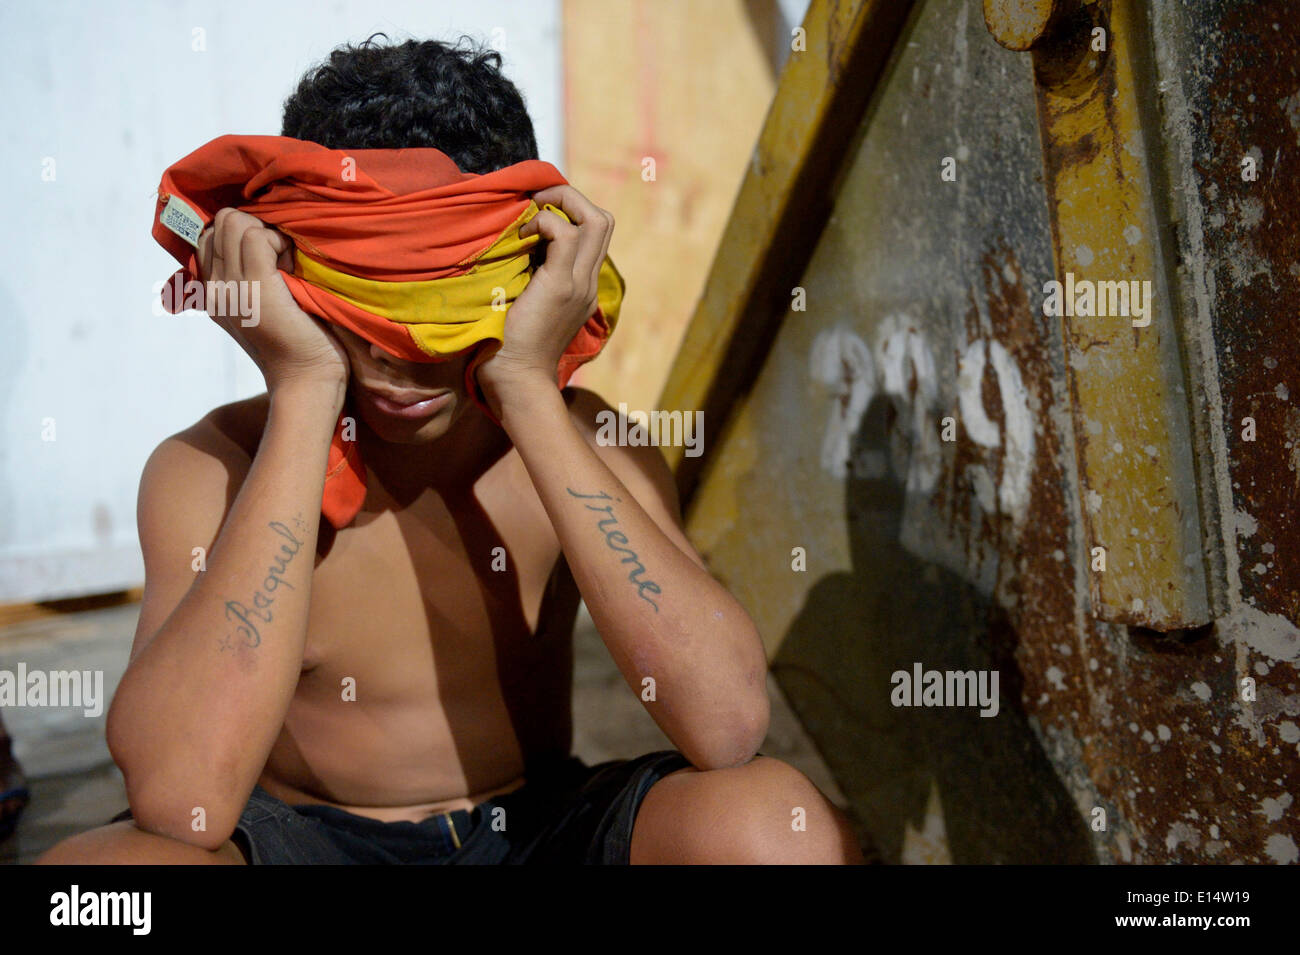 Street child, teenager, 13 years, covering his face, Fortaleza, Ceará, Brazil Stock Photo